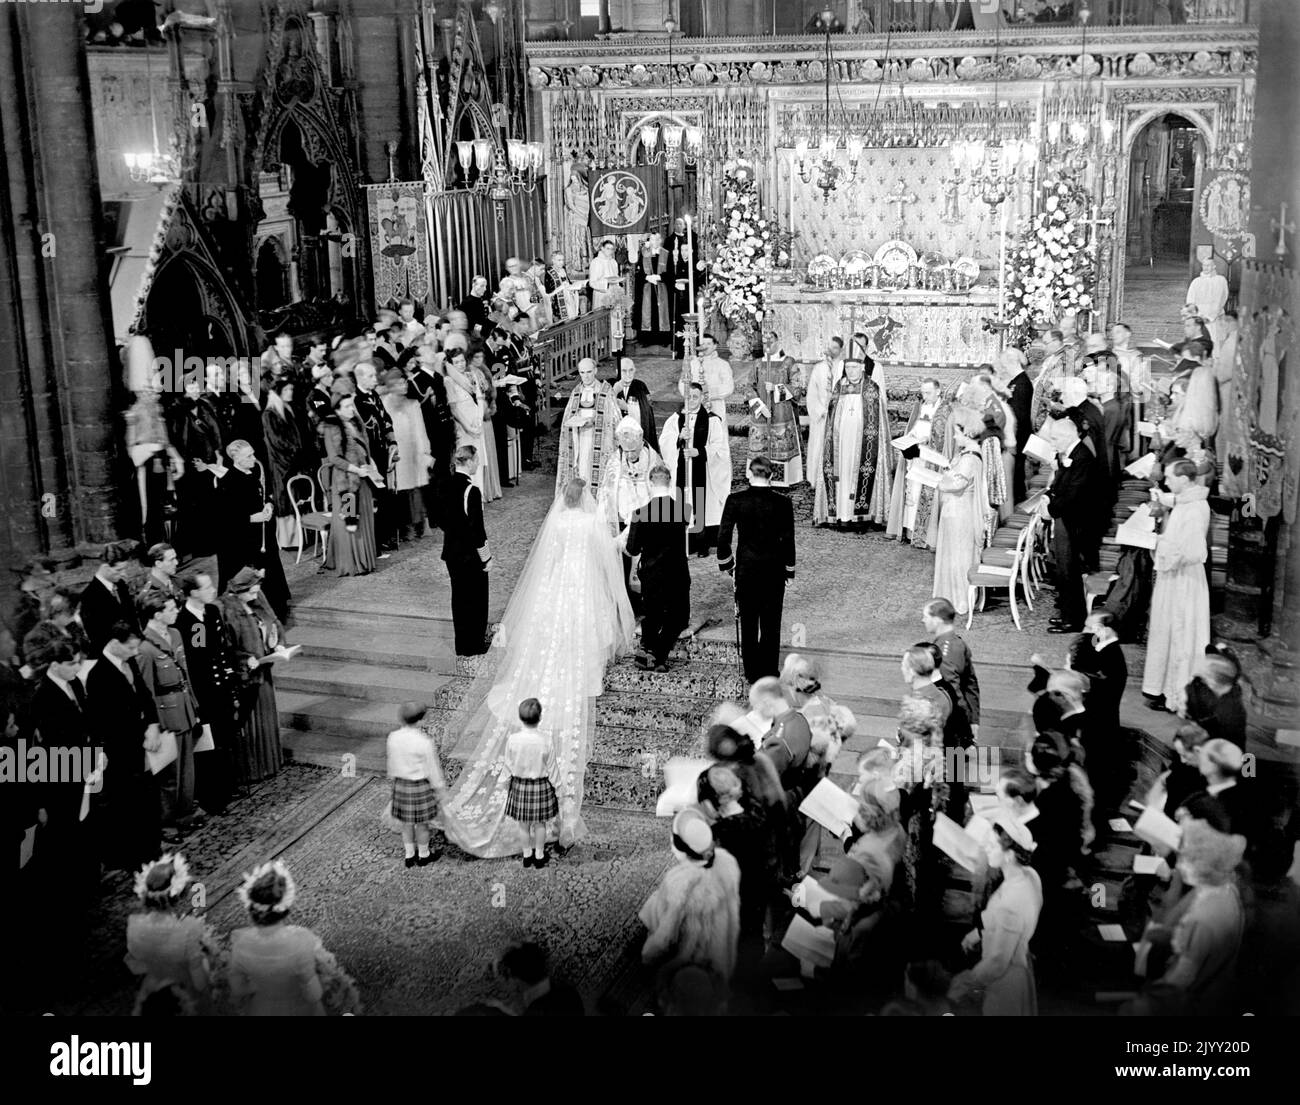 File photo dated 20/11/1947 of the scene at the altar steps during the Royal Wedding Ceremony in Westminster Abbey. The King stands to the left of the bride; on the bridegroom's right is the groomsman, the Marques of Milford Haven. The bride's train is held by two pages T.R.H Prince William of Gloucester and Prince Michael of Kent. The Royal couple were the country???s Prince Charming and Fairy Princess and their wedding in Westminster Abbey captured the public imagination in the austere post-war days as the first great state occasion in the post-war years and a distraction from the hardships  Stock Photo